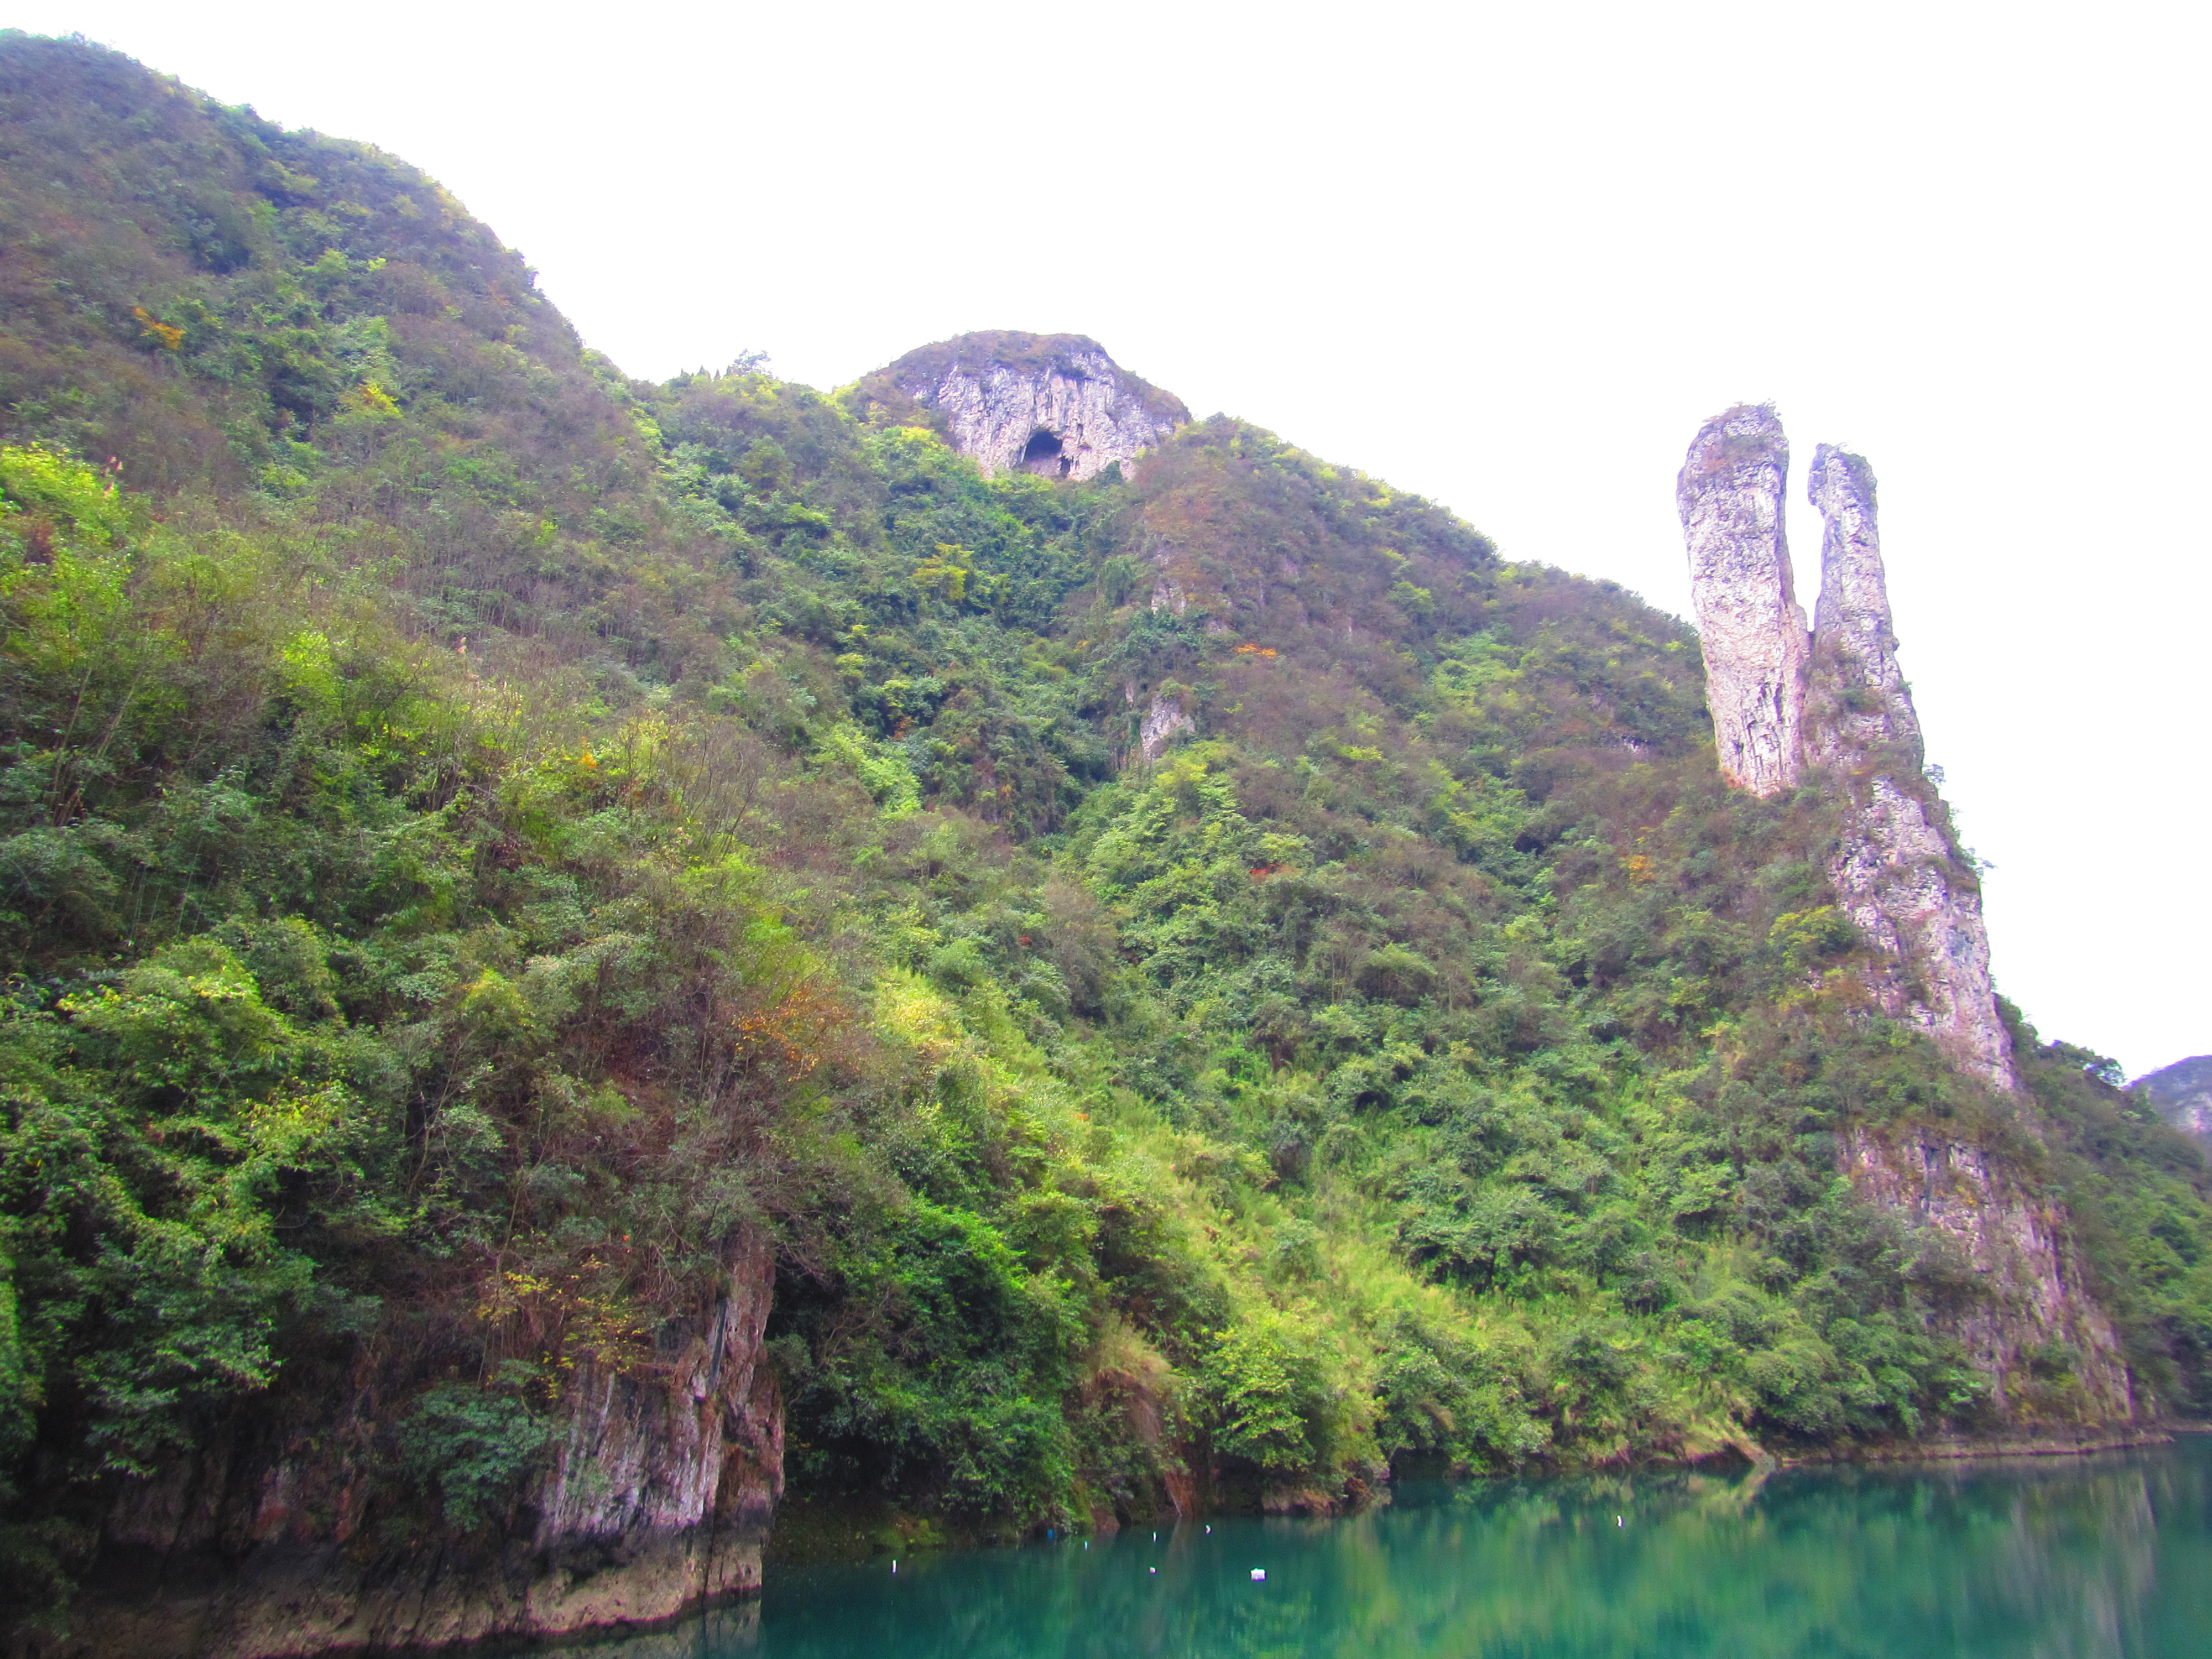 The most famous rock formation near Zhenyuan.  